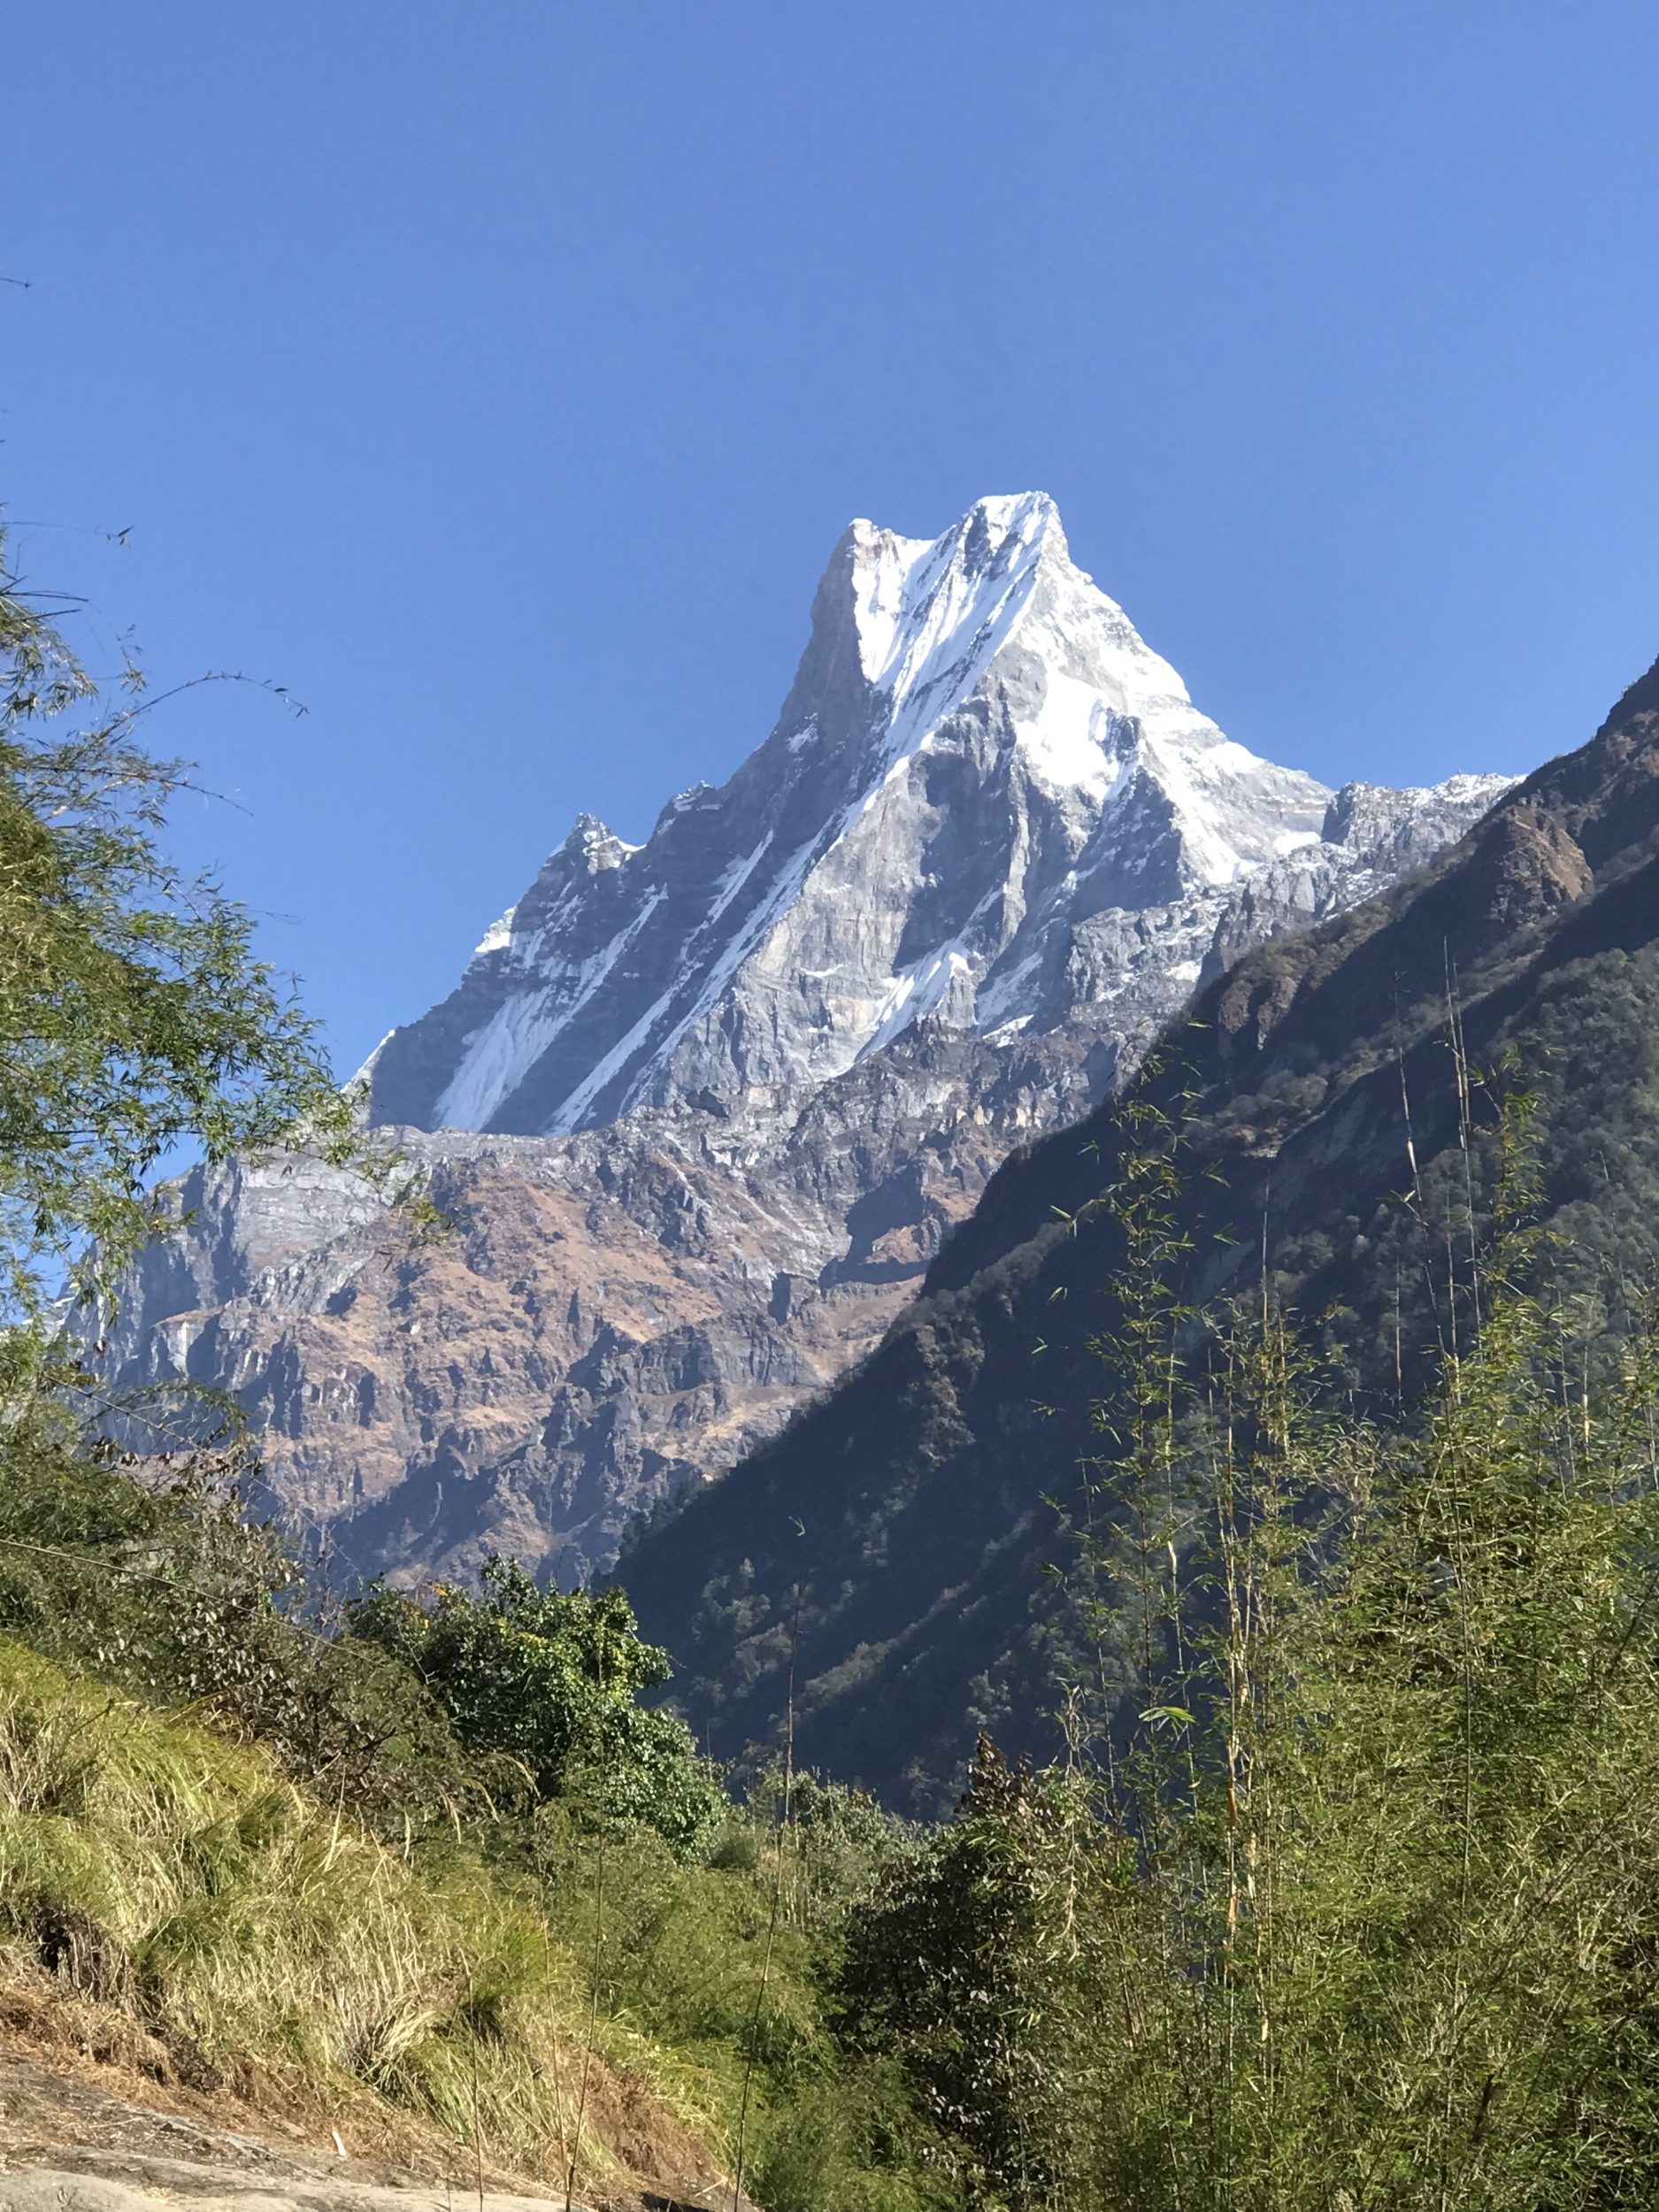 Mount Fishtail on the way to Bamboo from Chhomrong